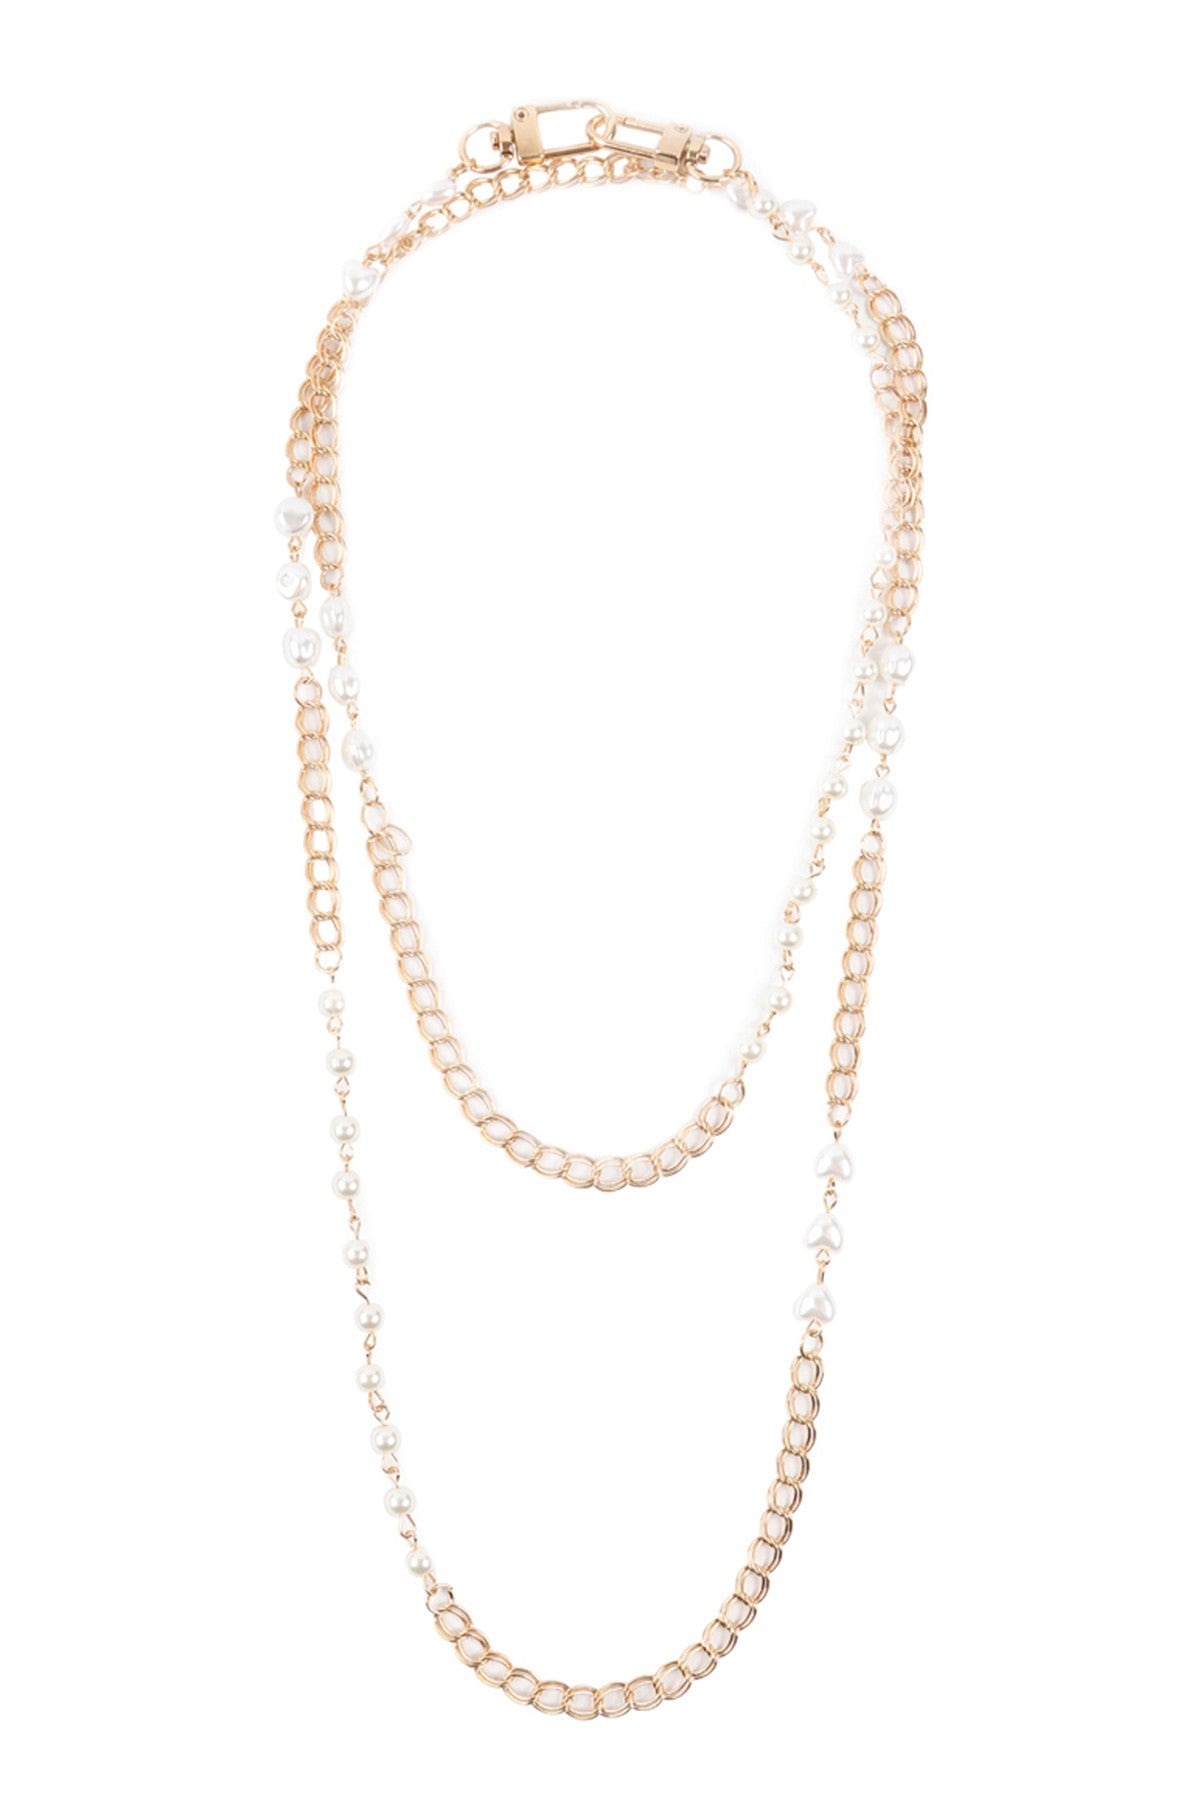 MULTI LAYERED PEARL CONVERTIBLE MASKS CHAIN OR NECKLACE BAG CHAIN